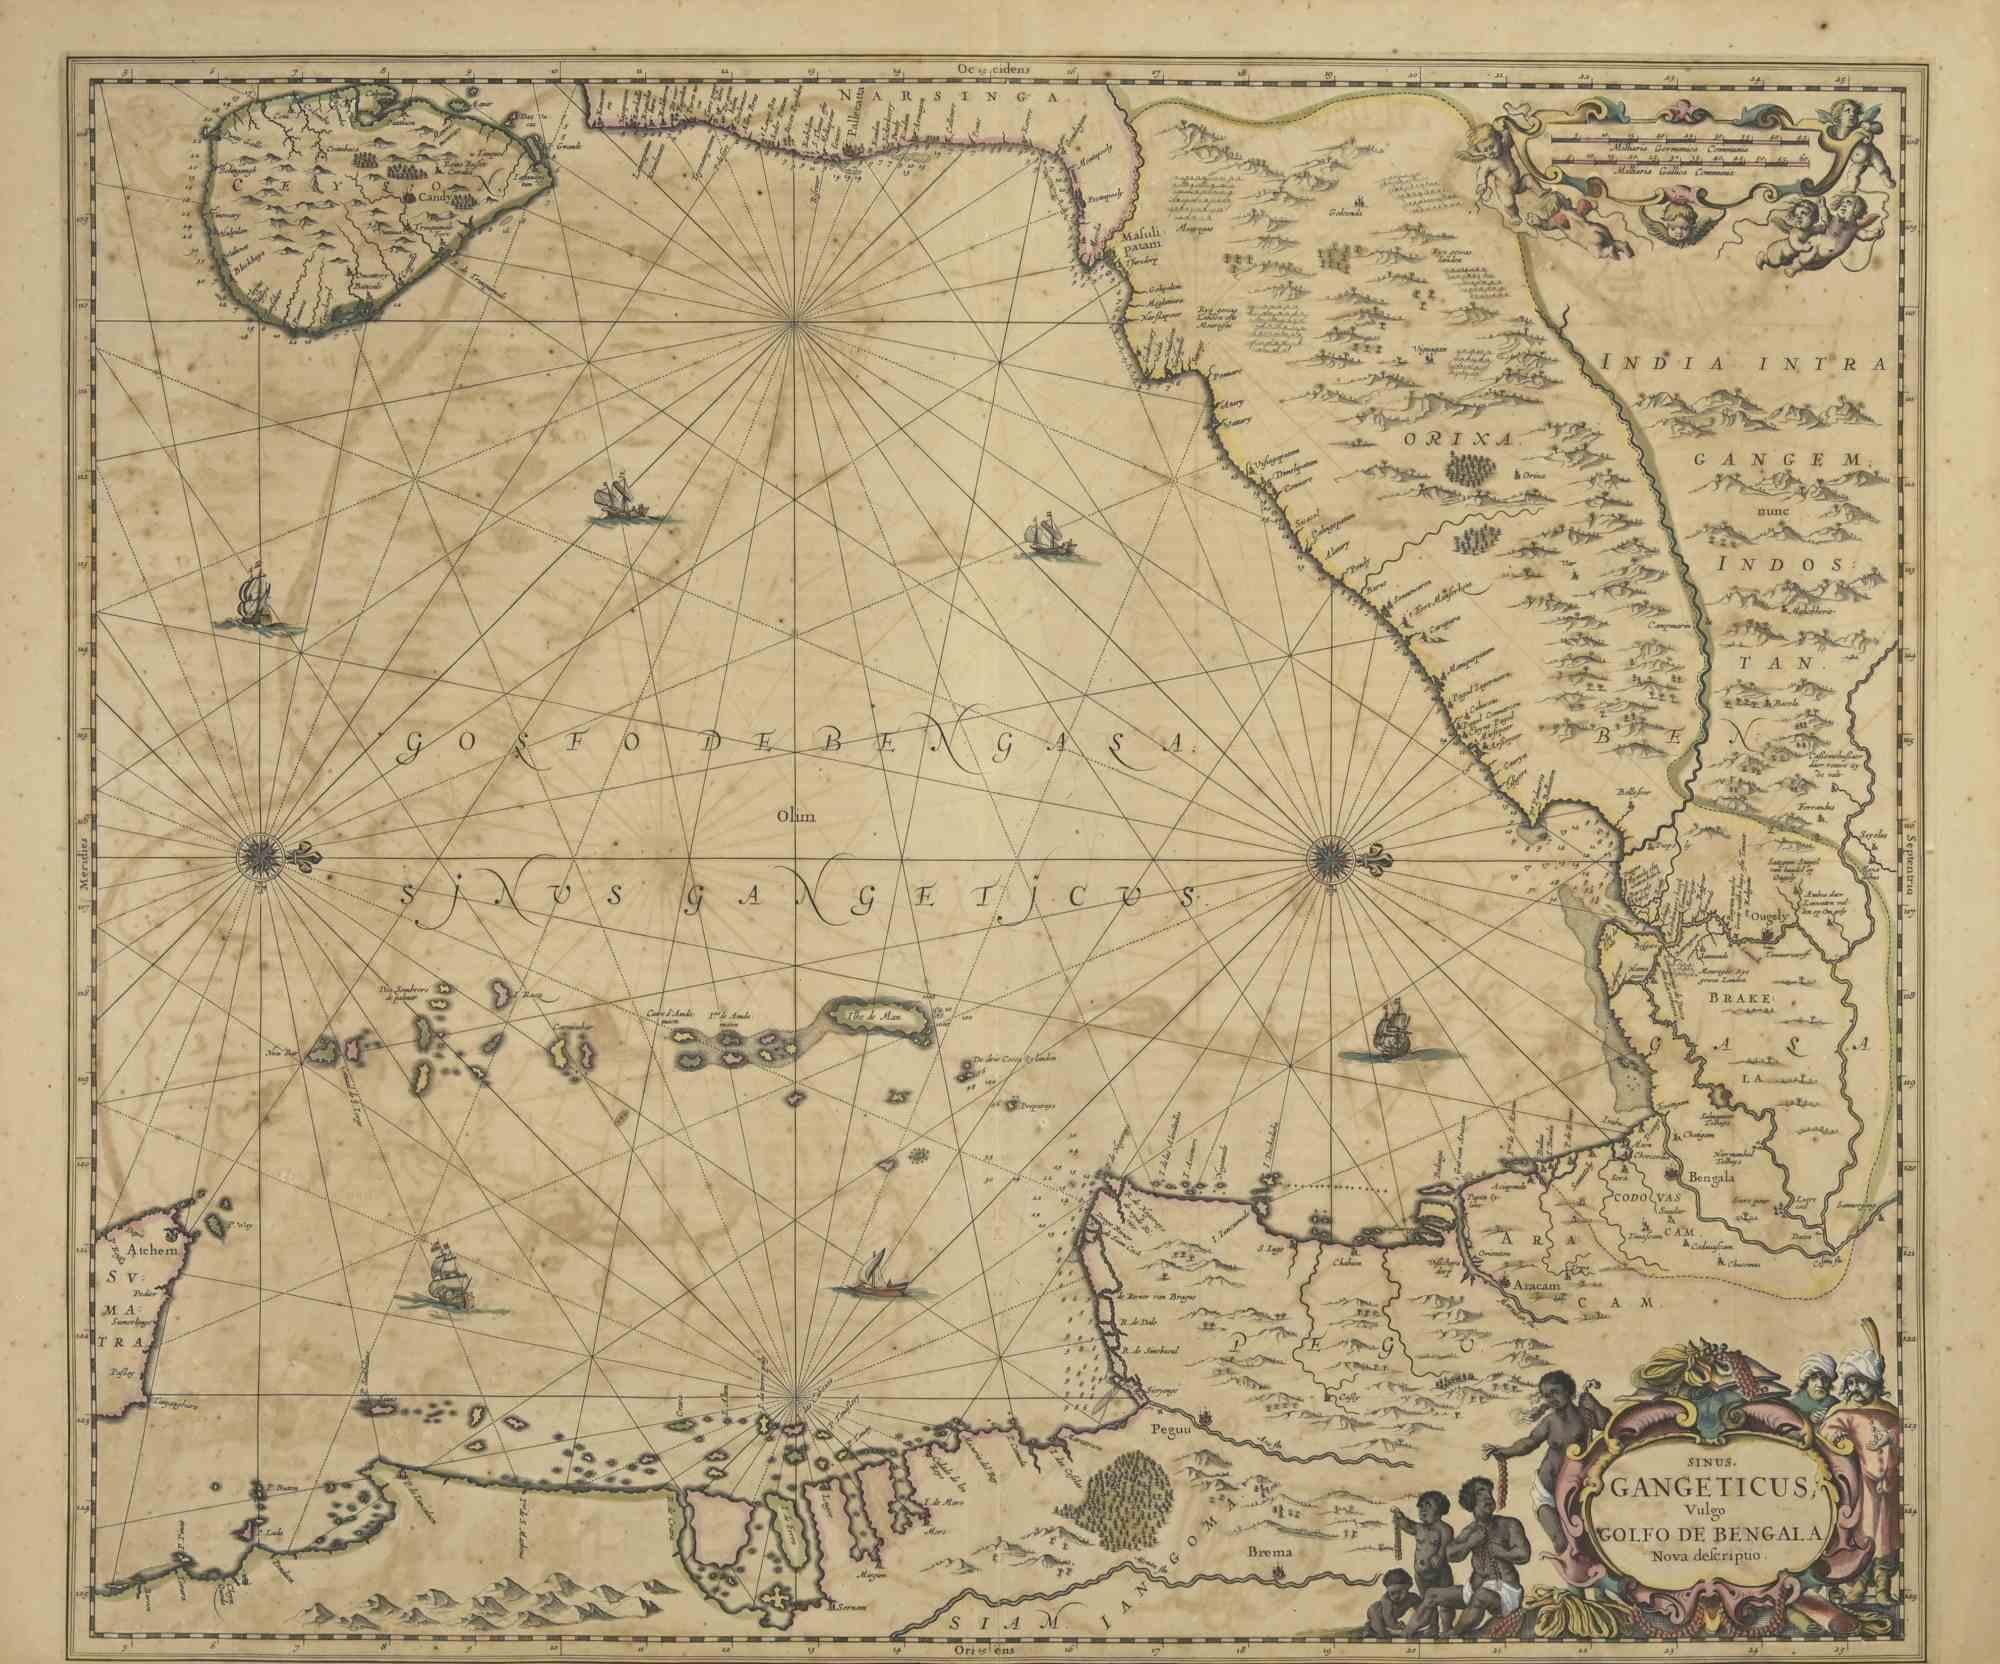 Golfo De Benngala is an antique map realized in 1650 by Johannes Janssonius (1588-1664).

The Map is Hand-colored etching, with coeval watercoloring.

Good conditions with slight foxing.

From Atlantis majoris quinta pars, Orbem maritimum [Novus